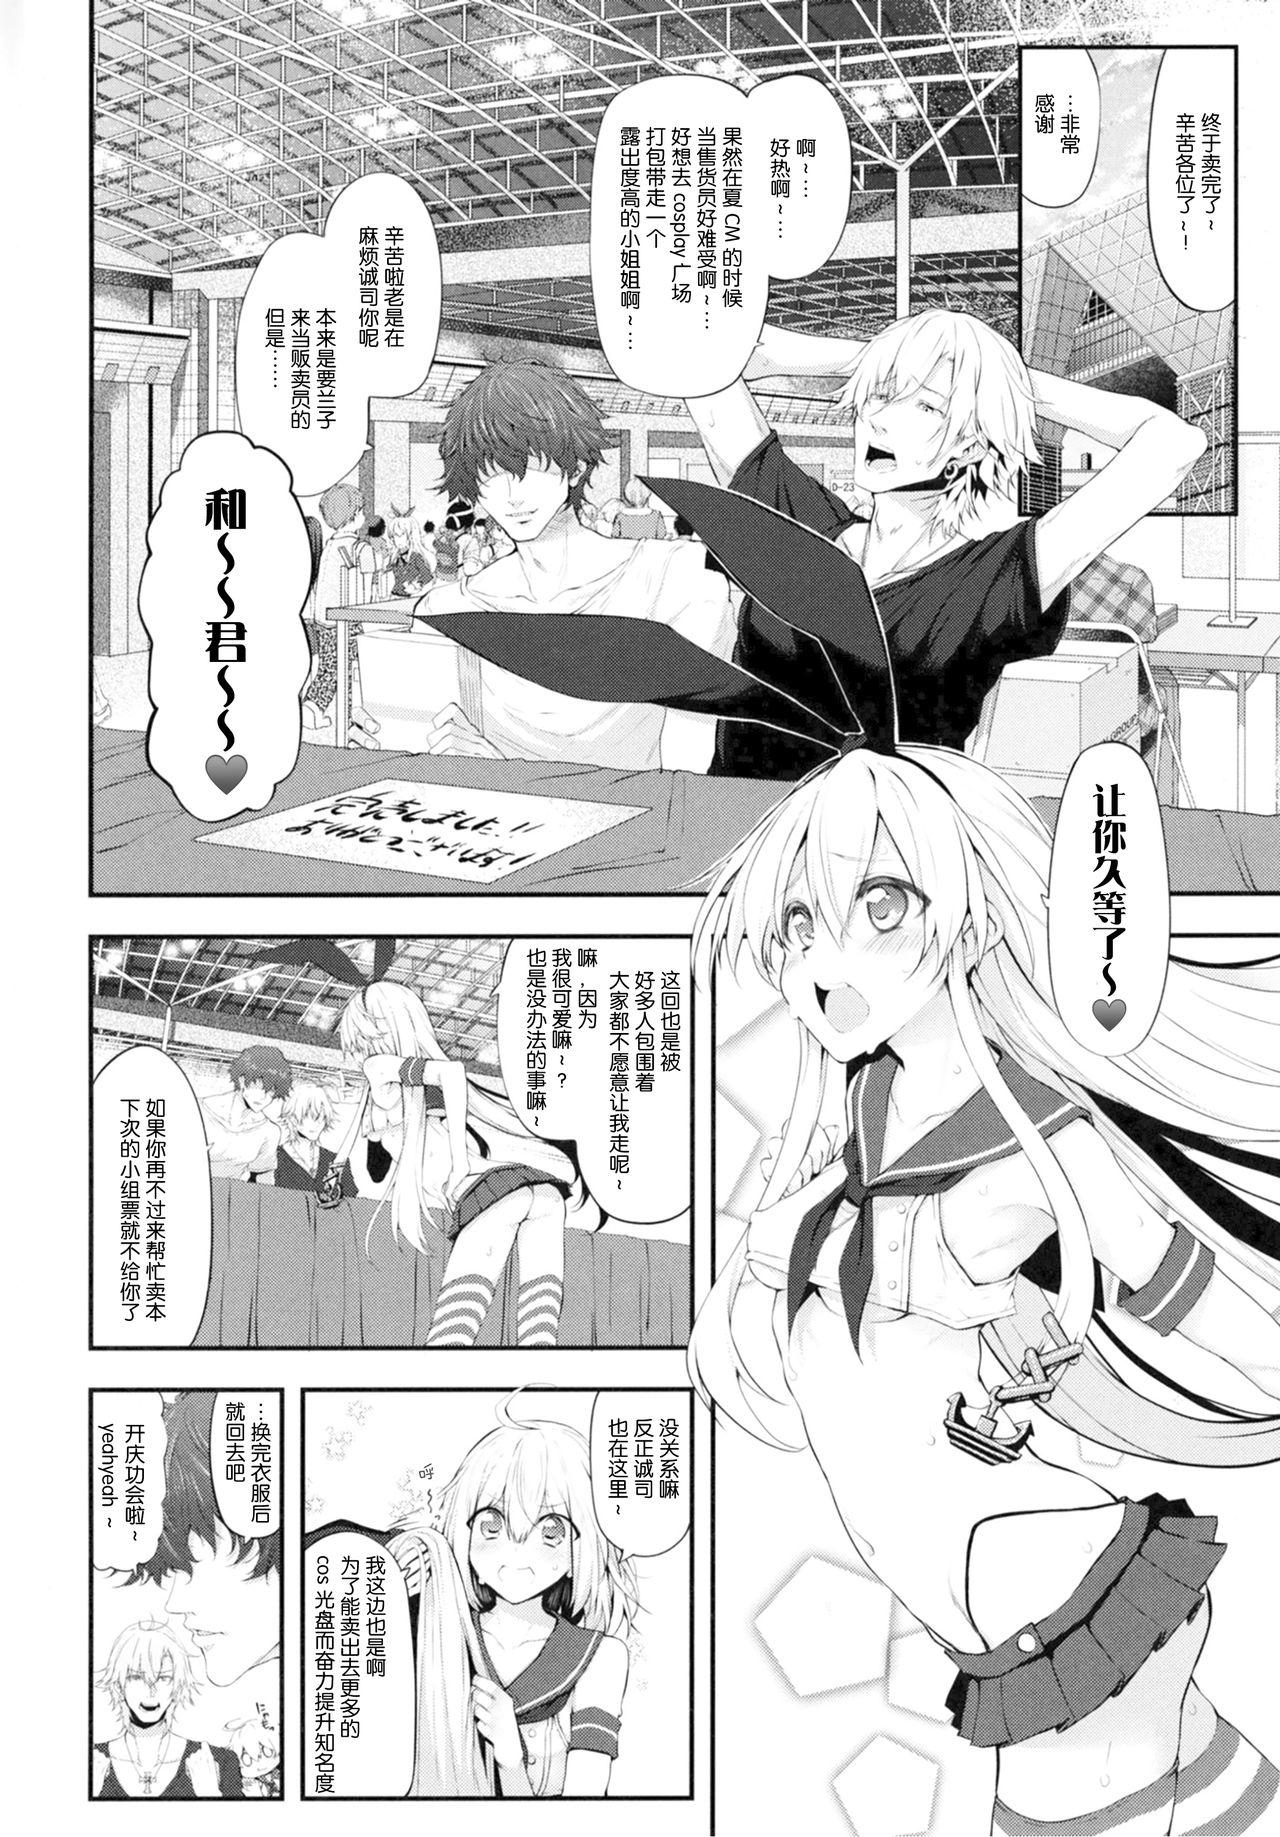 Special Locations COSBITCH! Marked-girls Origin Vol. 1 - Kantai collection Crossdresser - Page 4